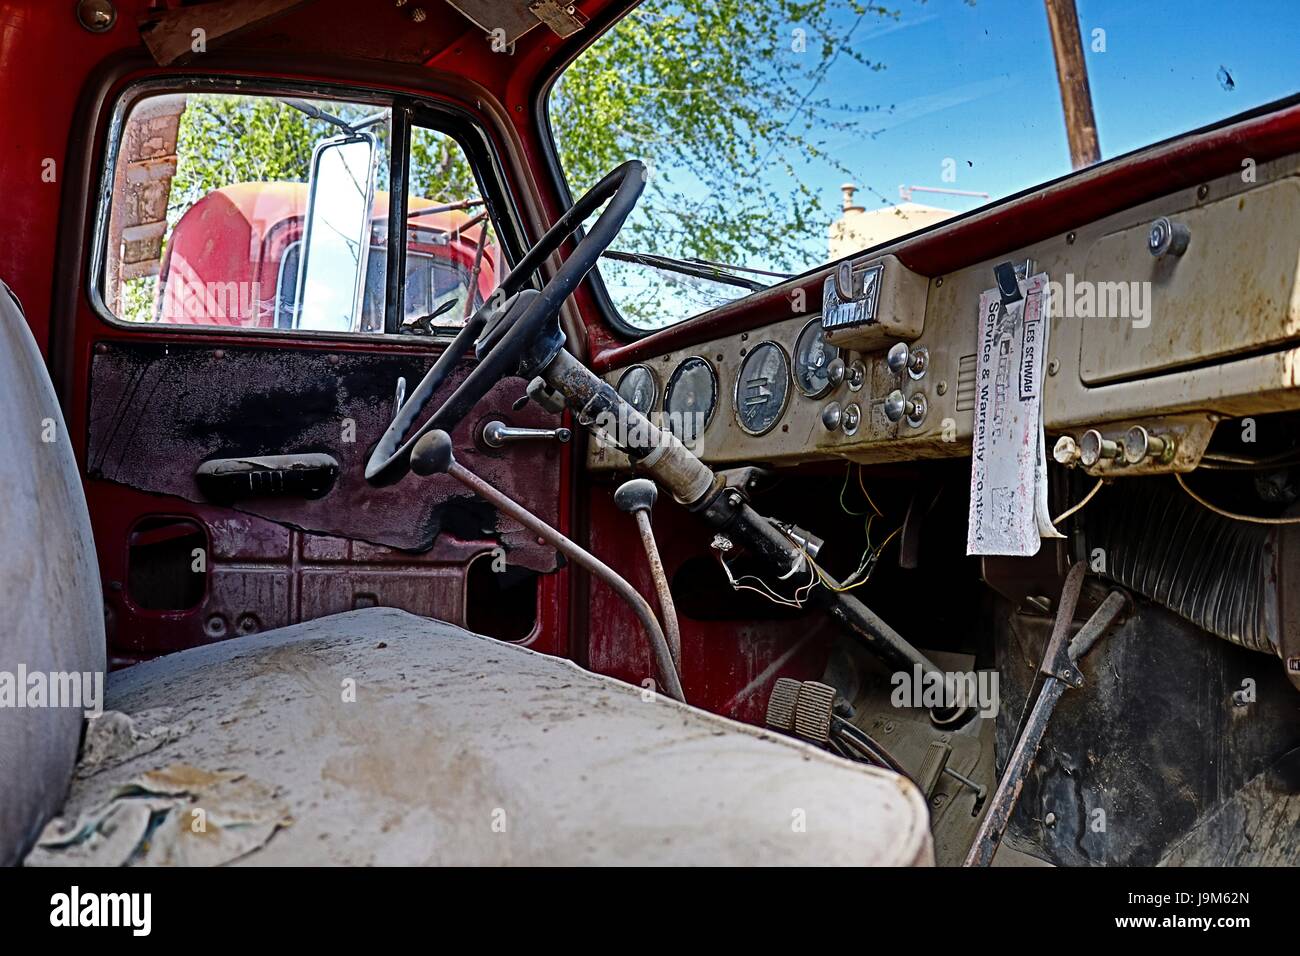 Beautiful Image Of The Interior Of An Old Abandoned Pickup